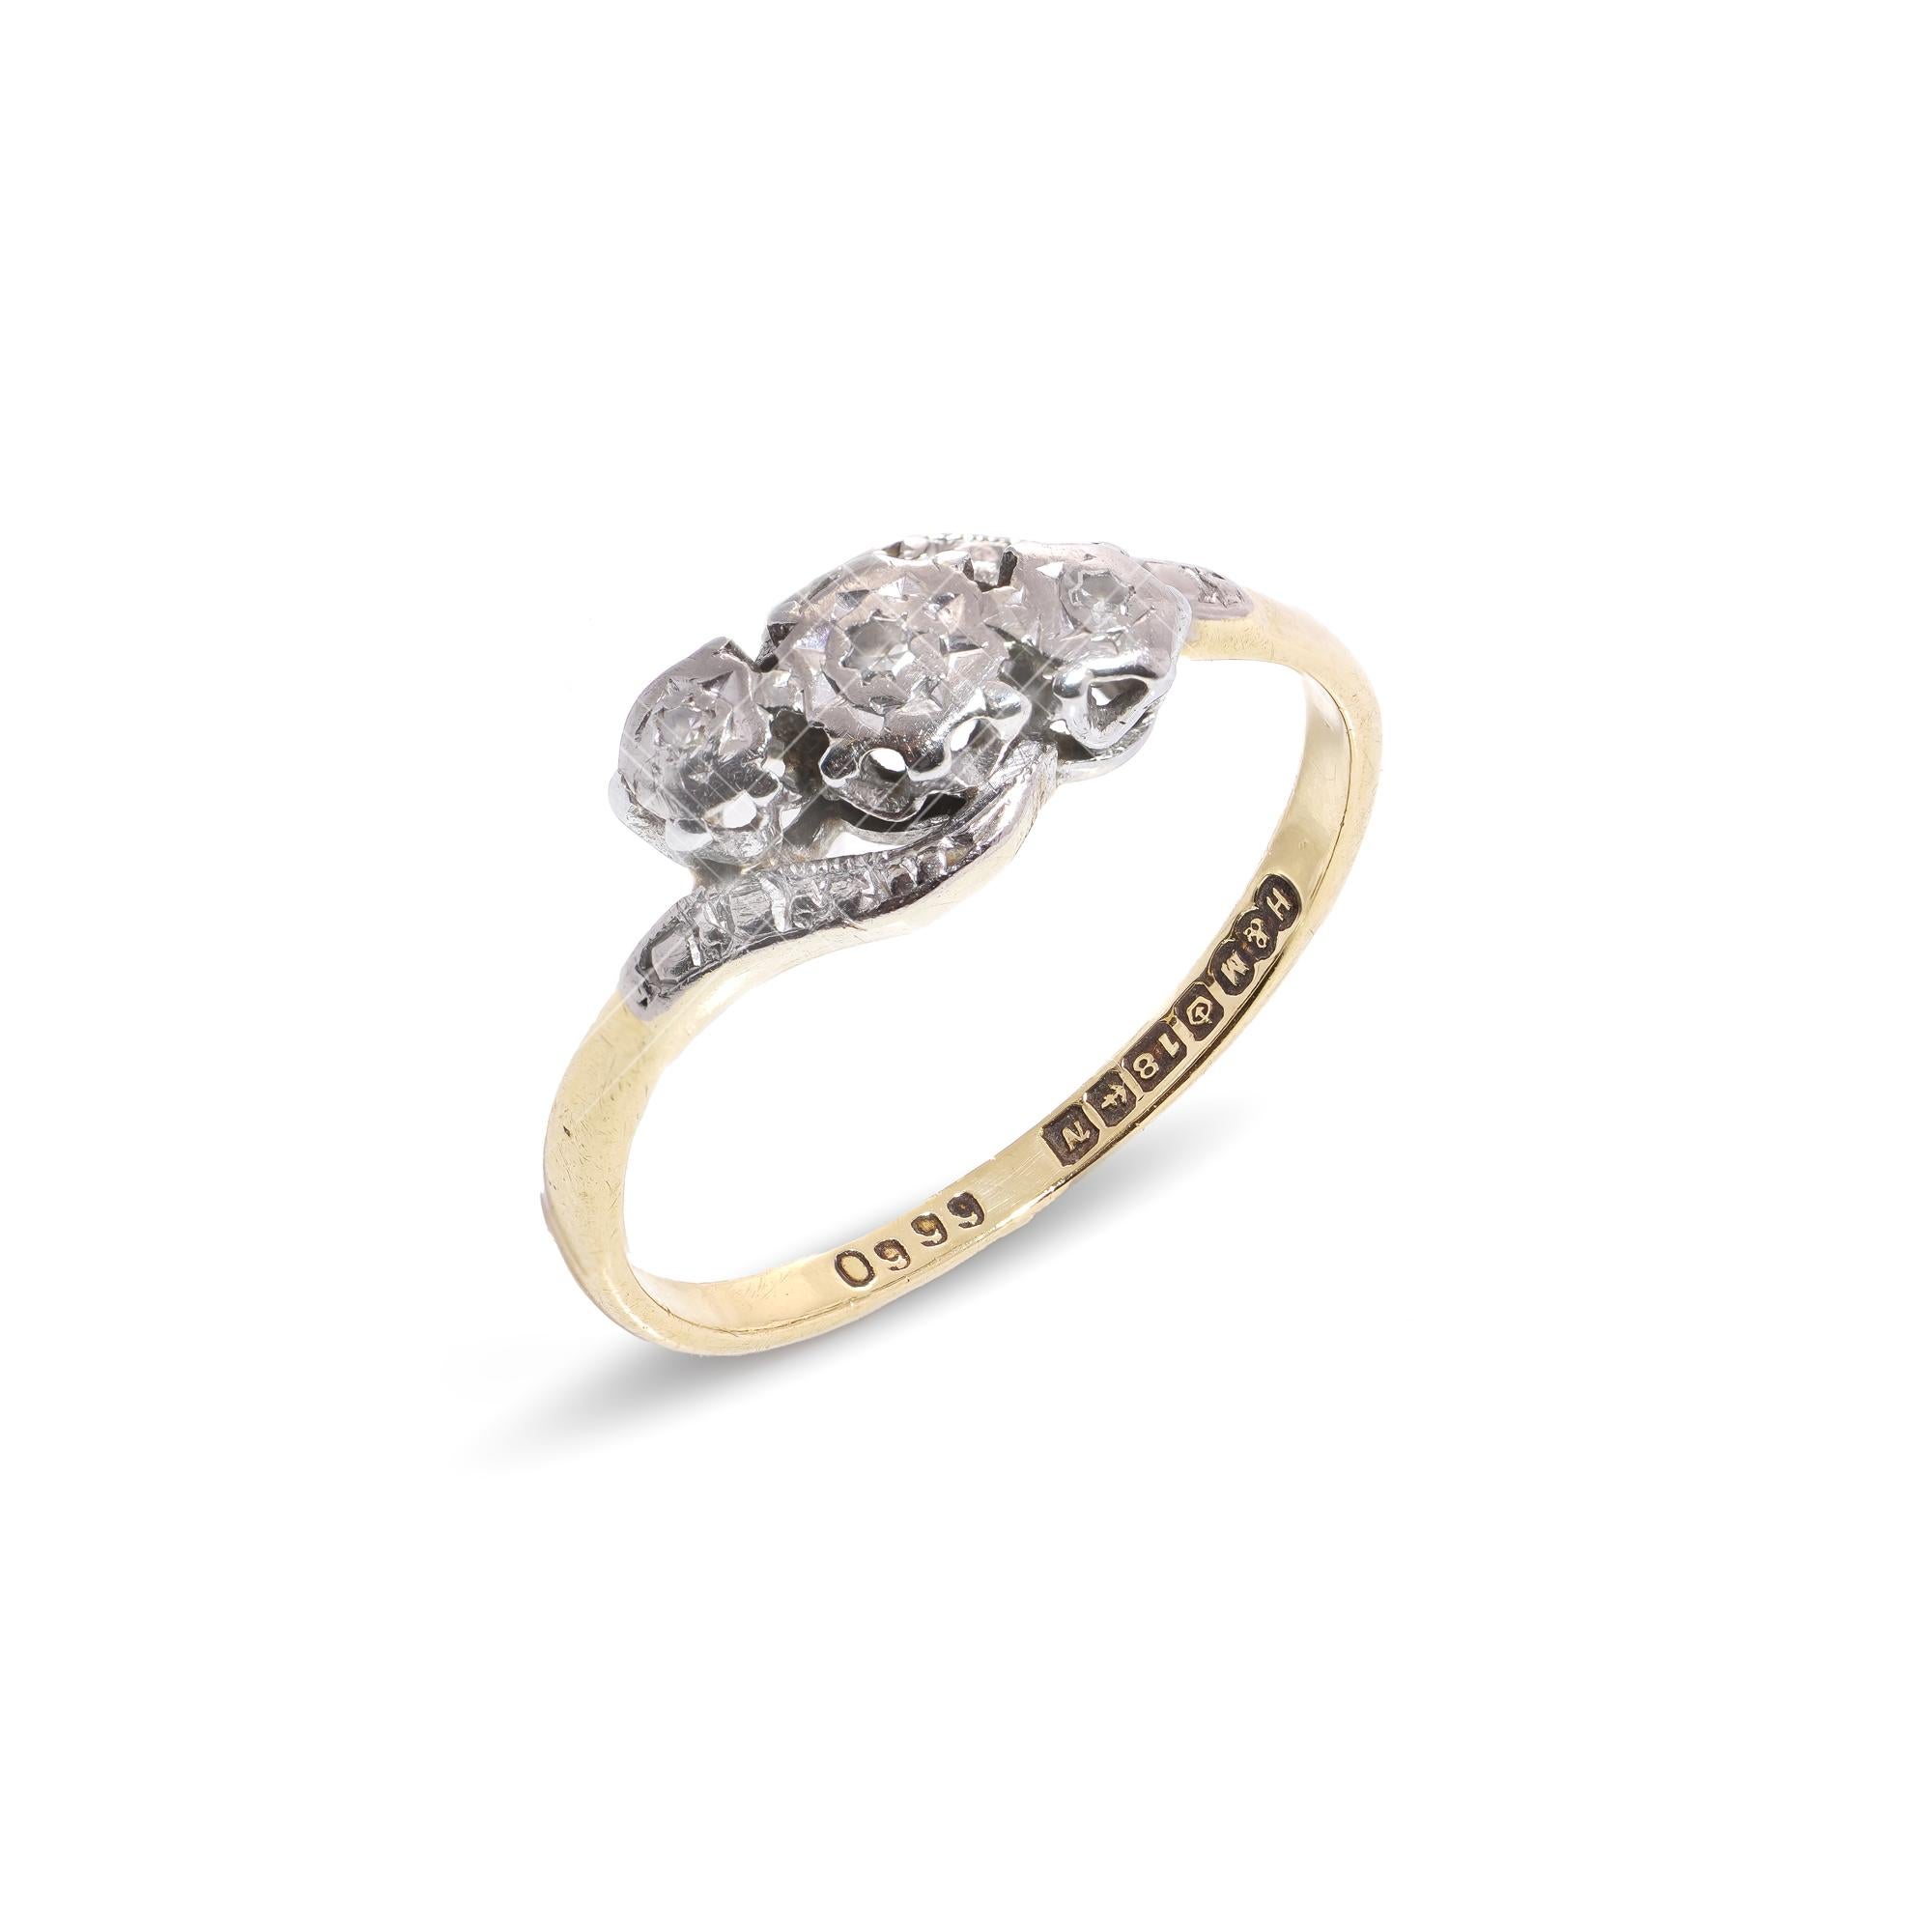 Vintage 18kt yellow and white gold diamond ring.
Made in England, Birmingham, 1987
Fully hallmarked.

Dimensions -
Finger Size (UK) = K 1/2 (EU) = 52.5 (US) = 5.75
Weight: 2.00 grams

Diamonds -
Cut: Round brilliant
Quantity of stones: 3
Carat